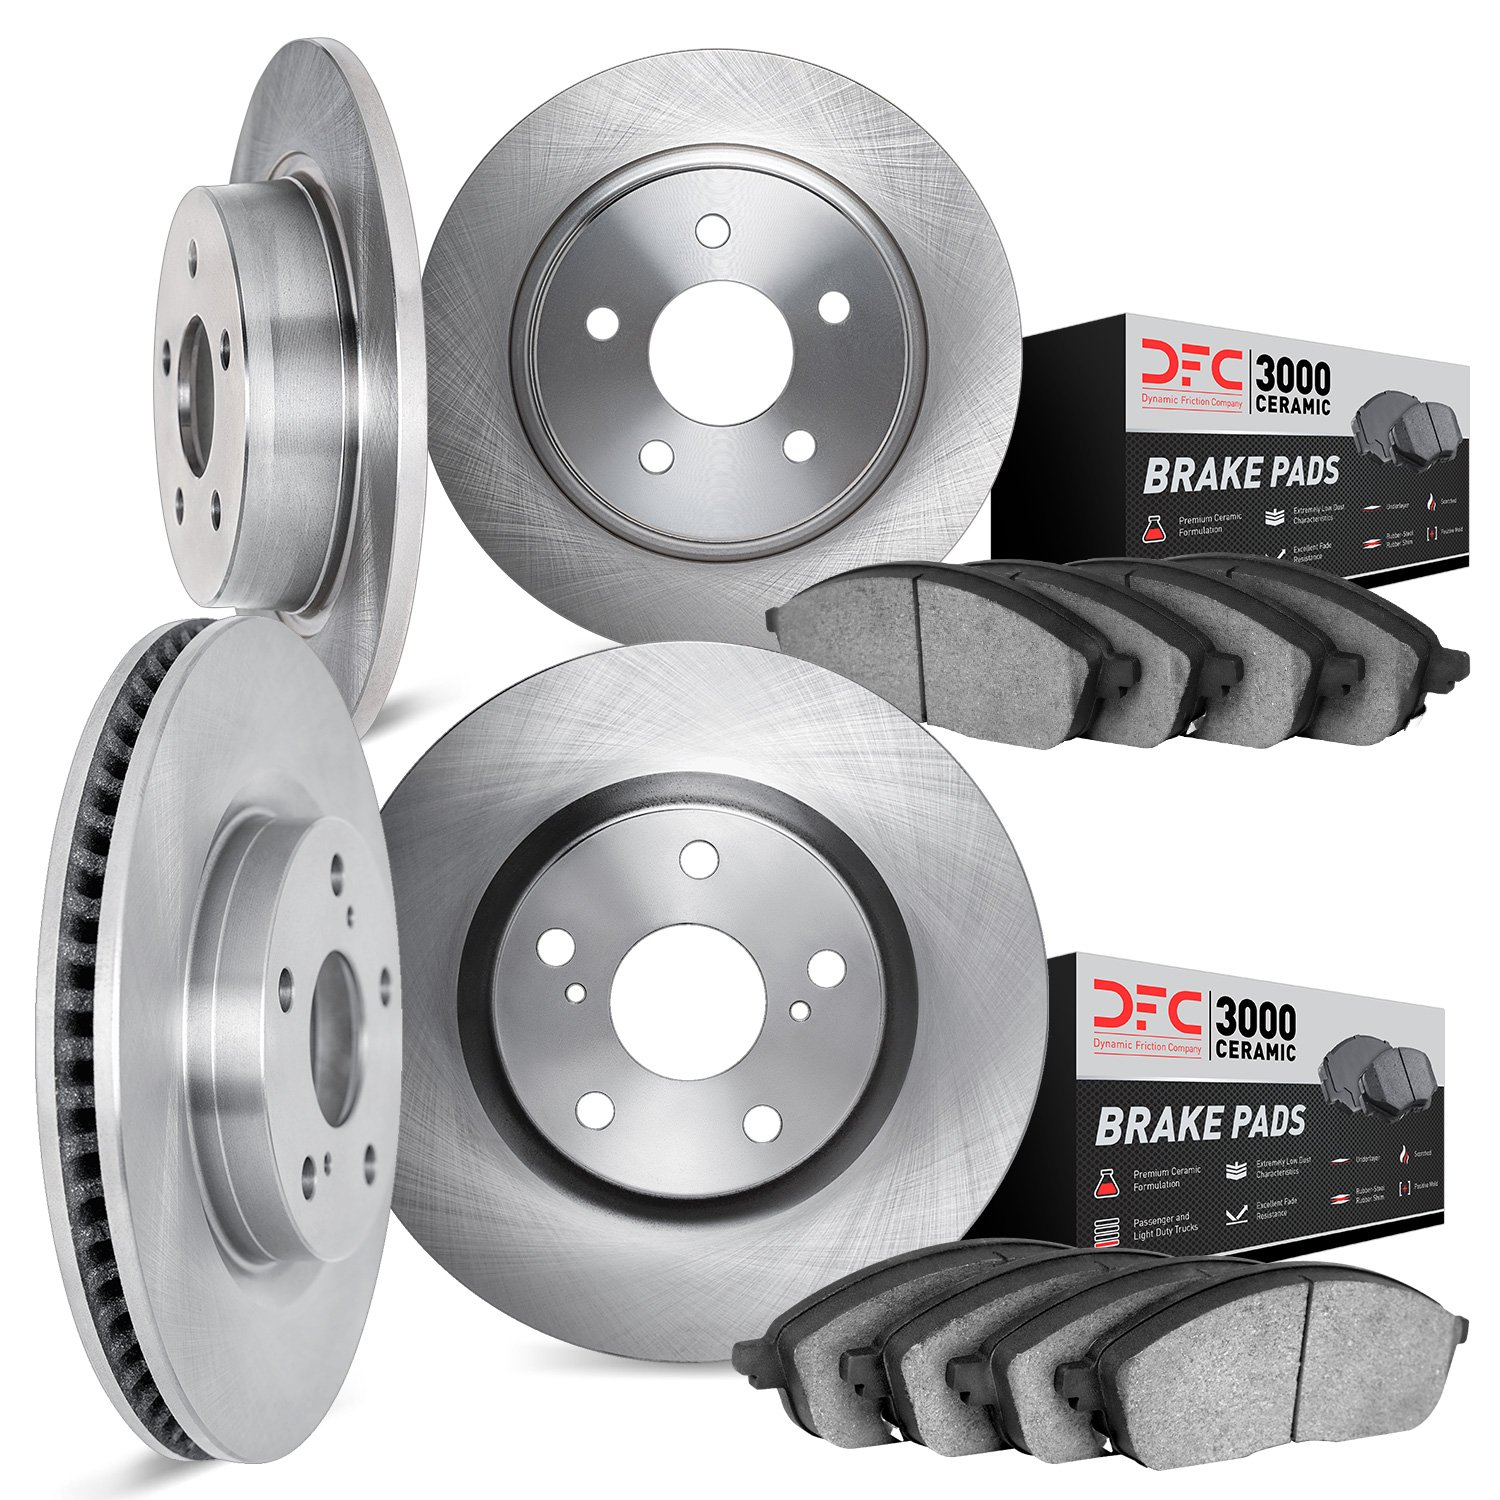 6304-76064 Brake Rotors with 3000-Series Ceramic Brake Pads Kit, 2002-2003 Lexus/Toyota/Scion, Position: Front and Rear